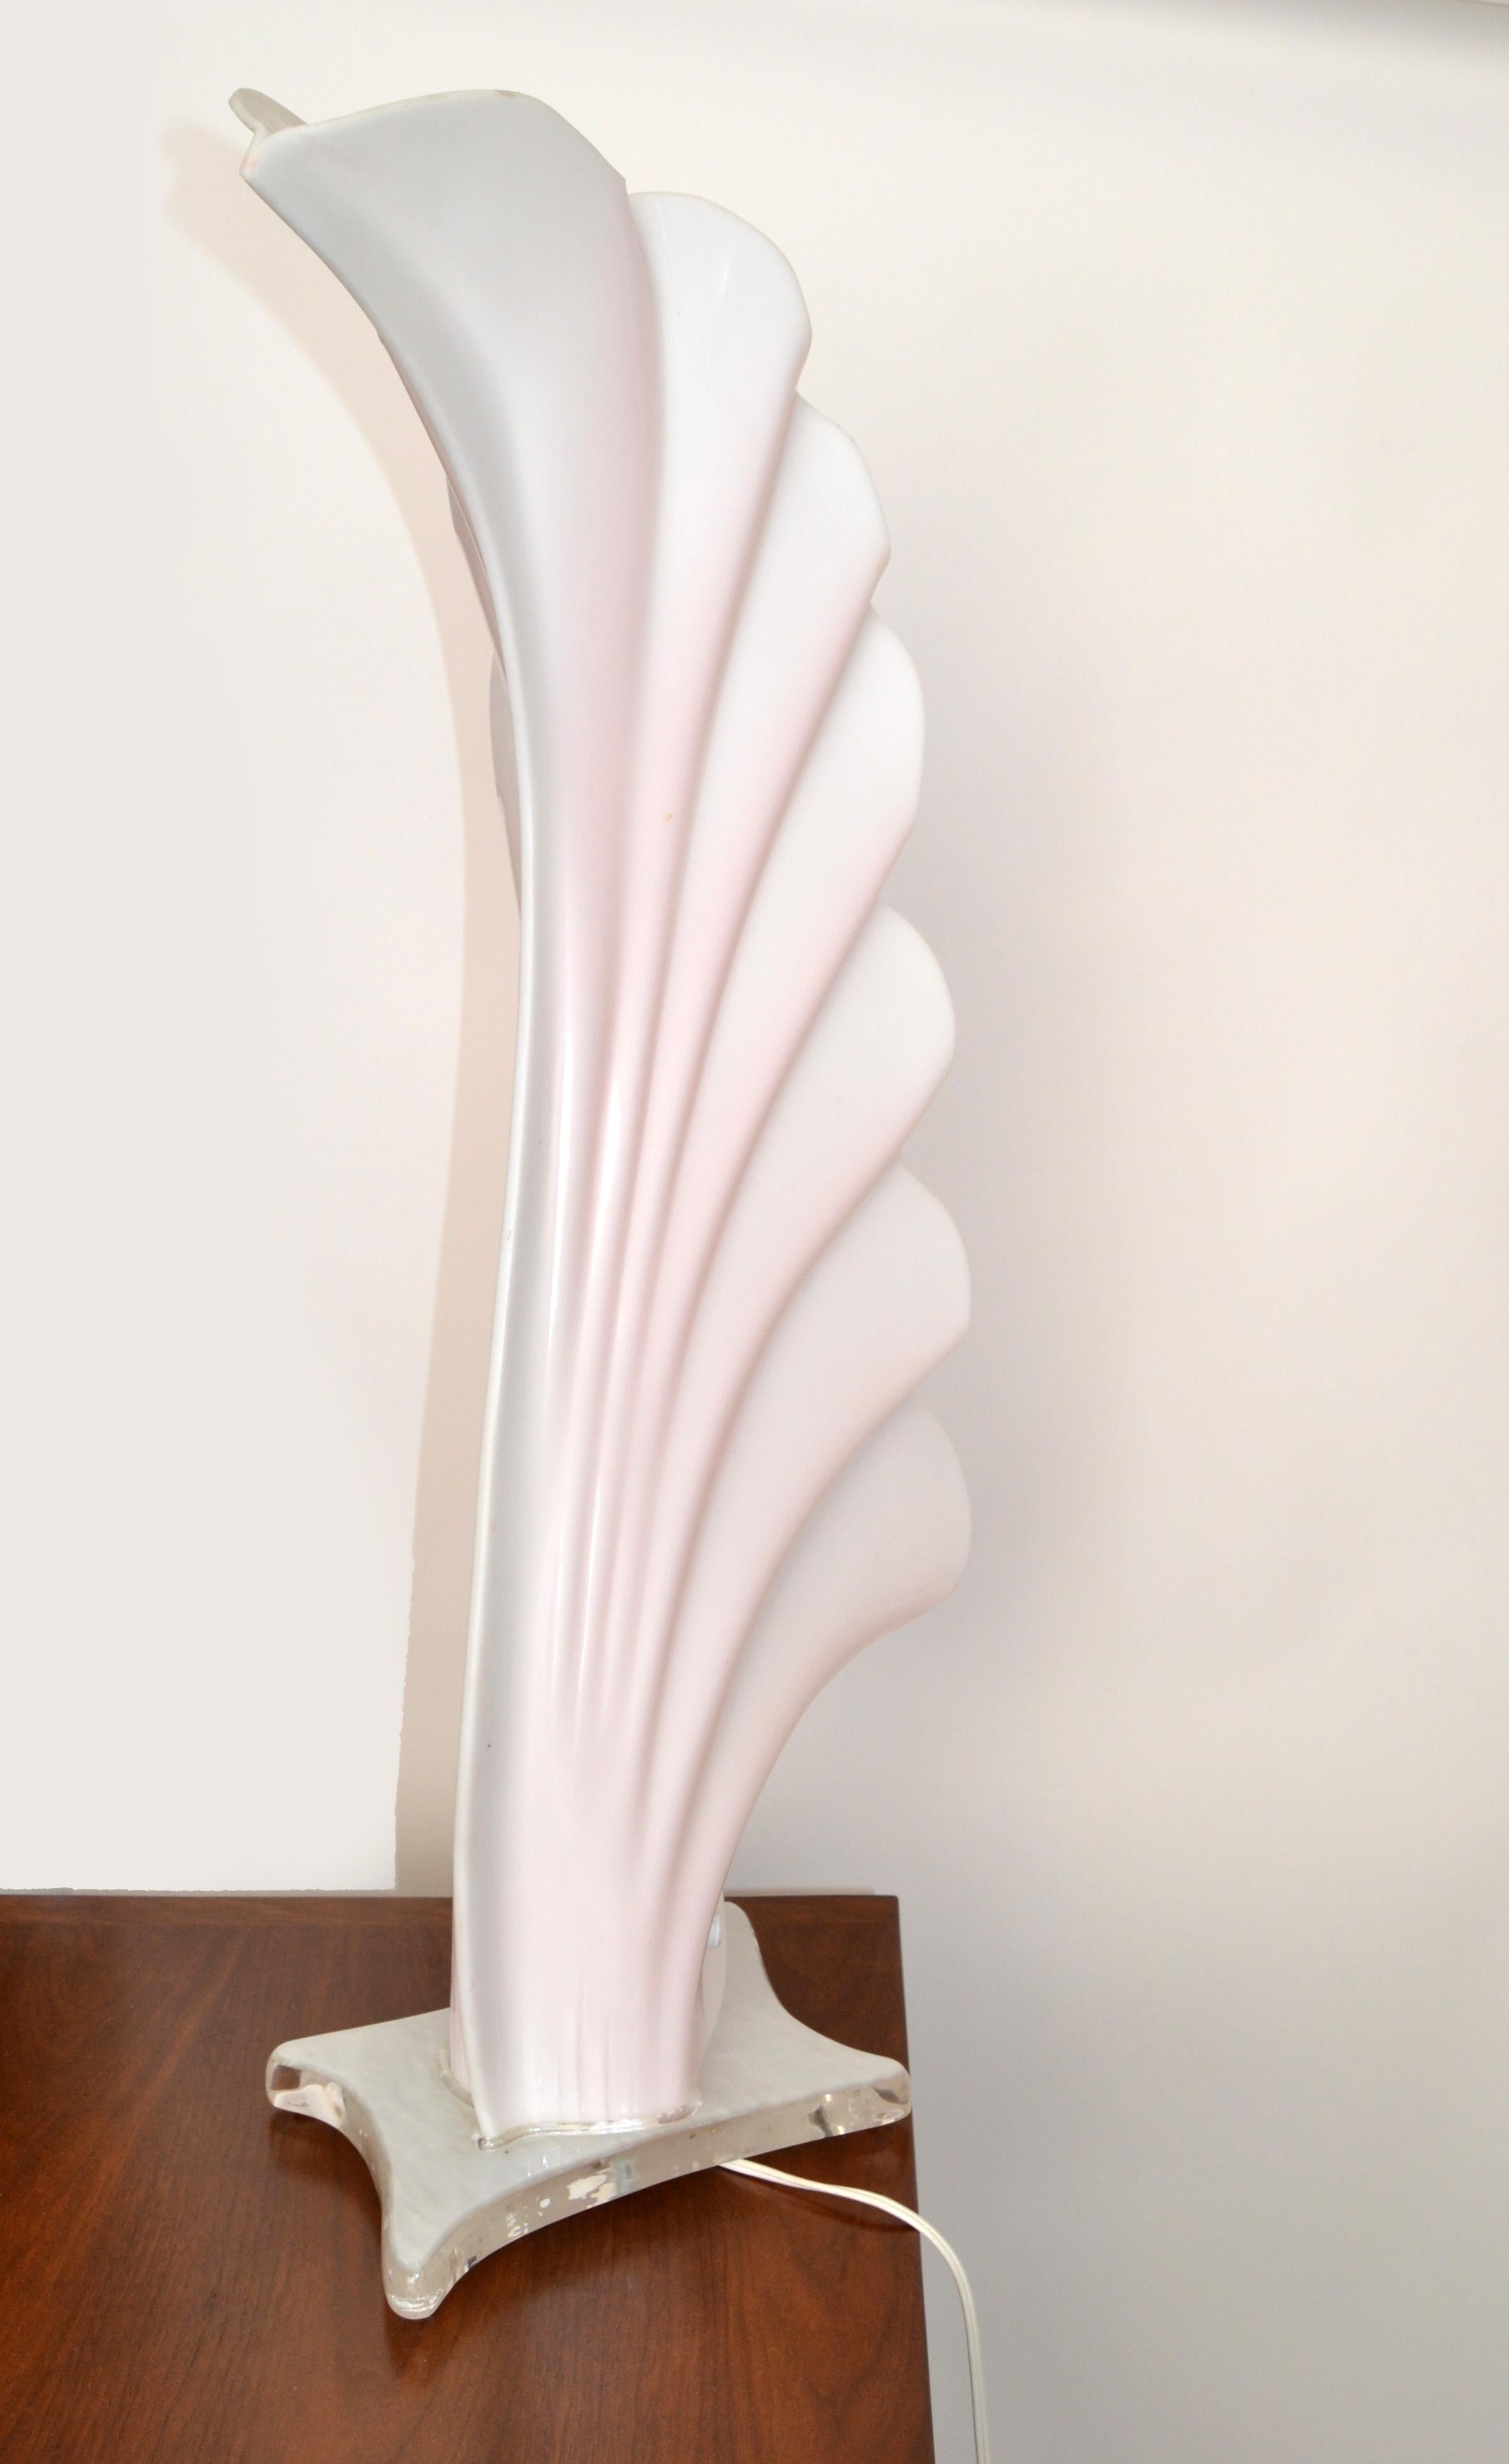 Monumental Pink and White Acrylic Table Lamp by Roger Rougier made in Canada.
US Wiring with Porcelain Socket and takes a regular or LED bulb max. 60 watts.
Base measures: 10 x 7 inches.
In good vintage condition with only light signs of wear to the